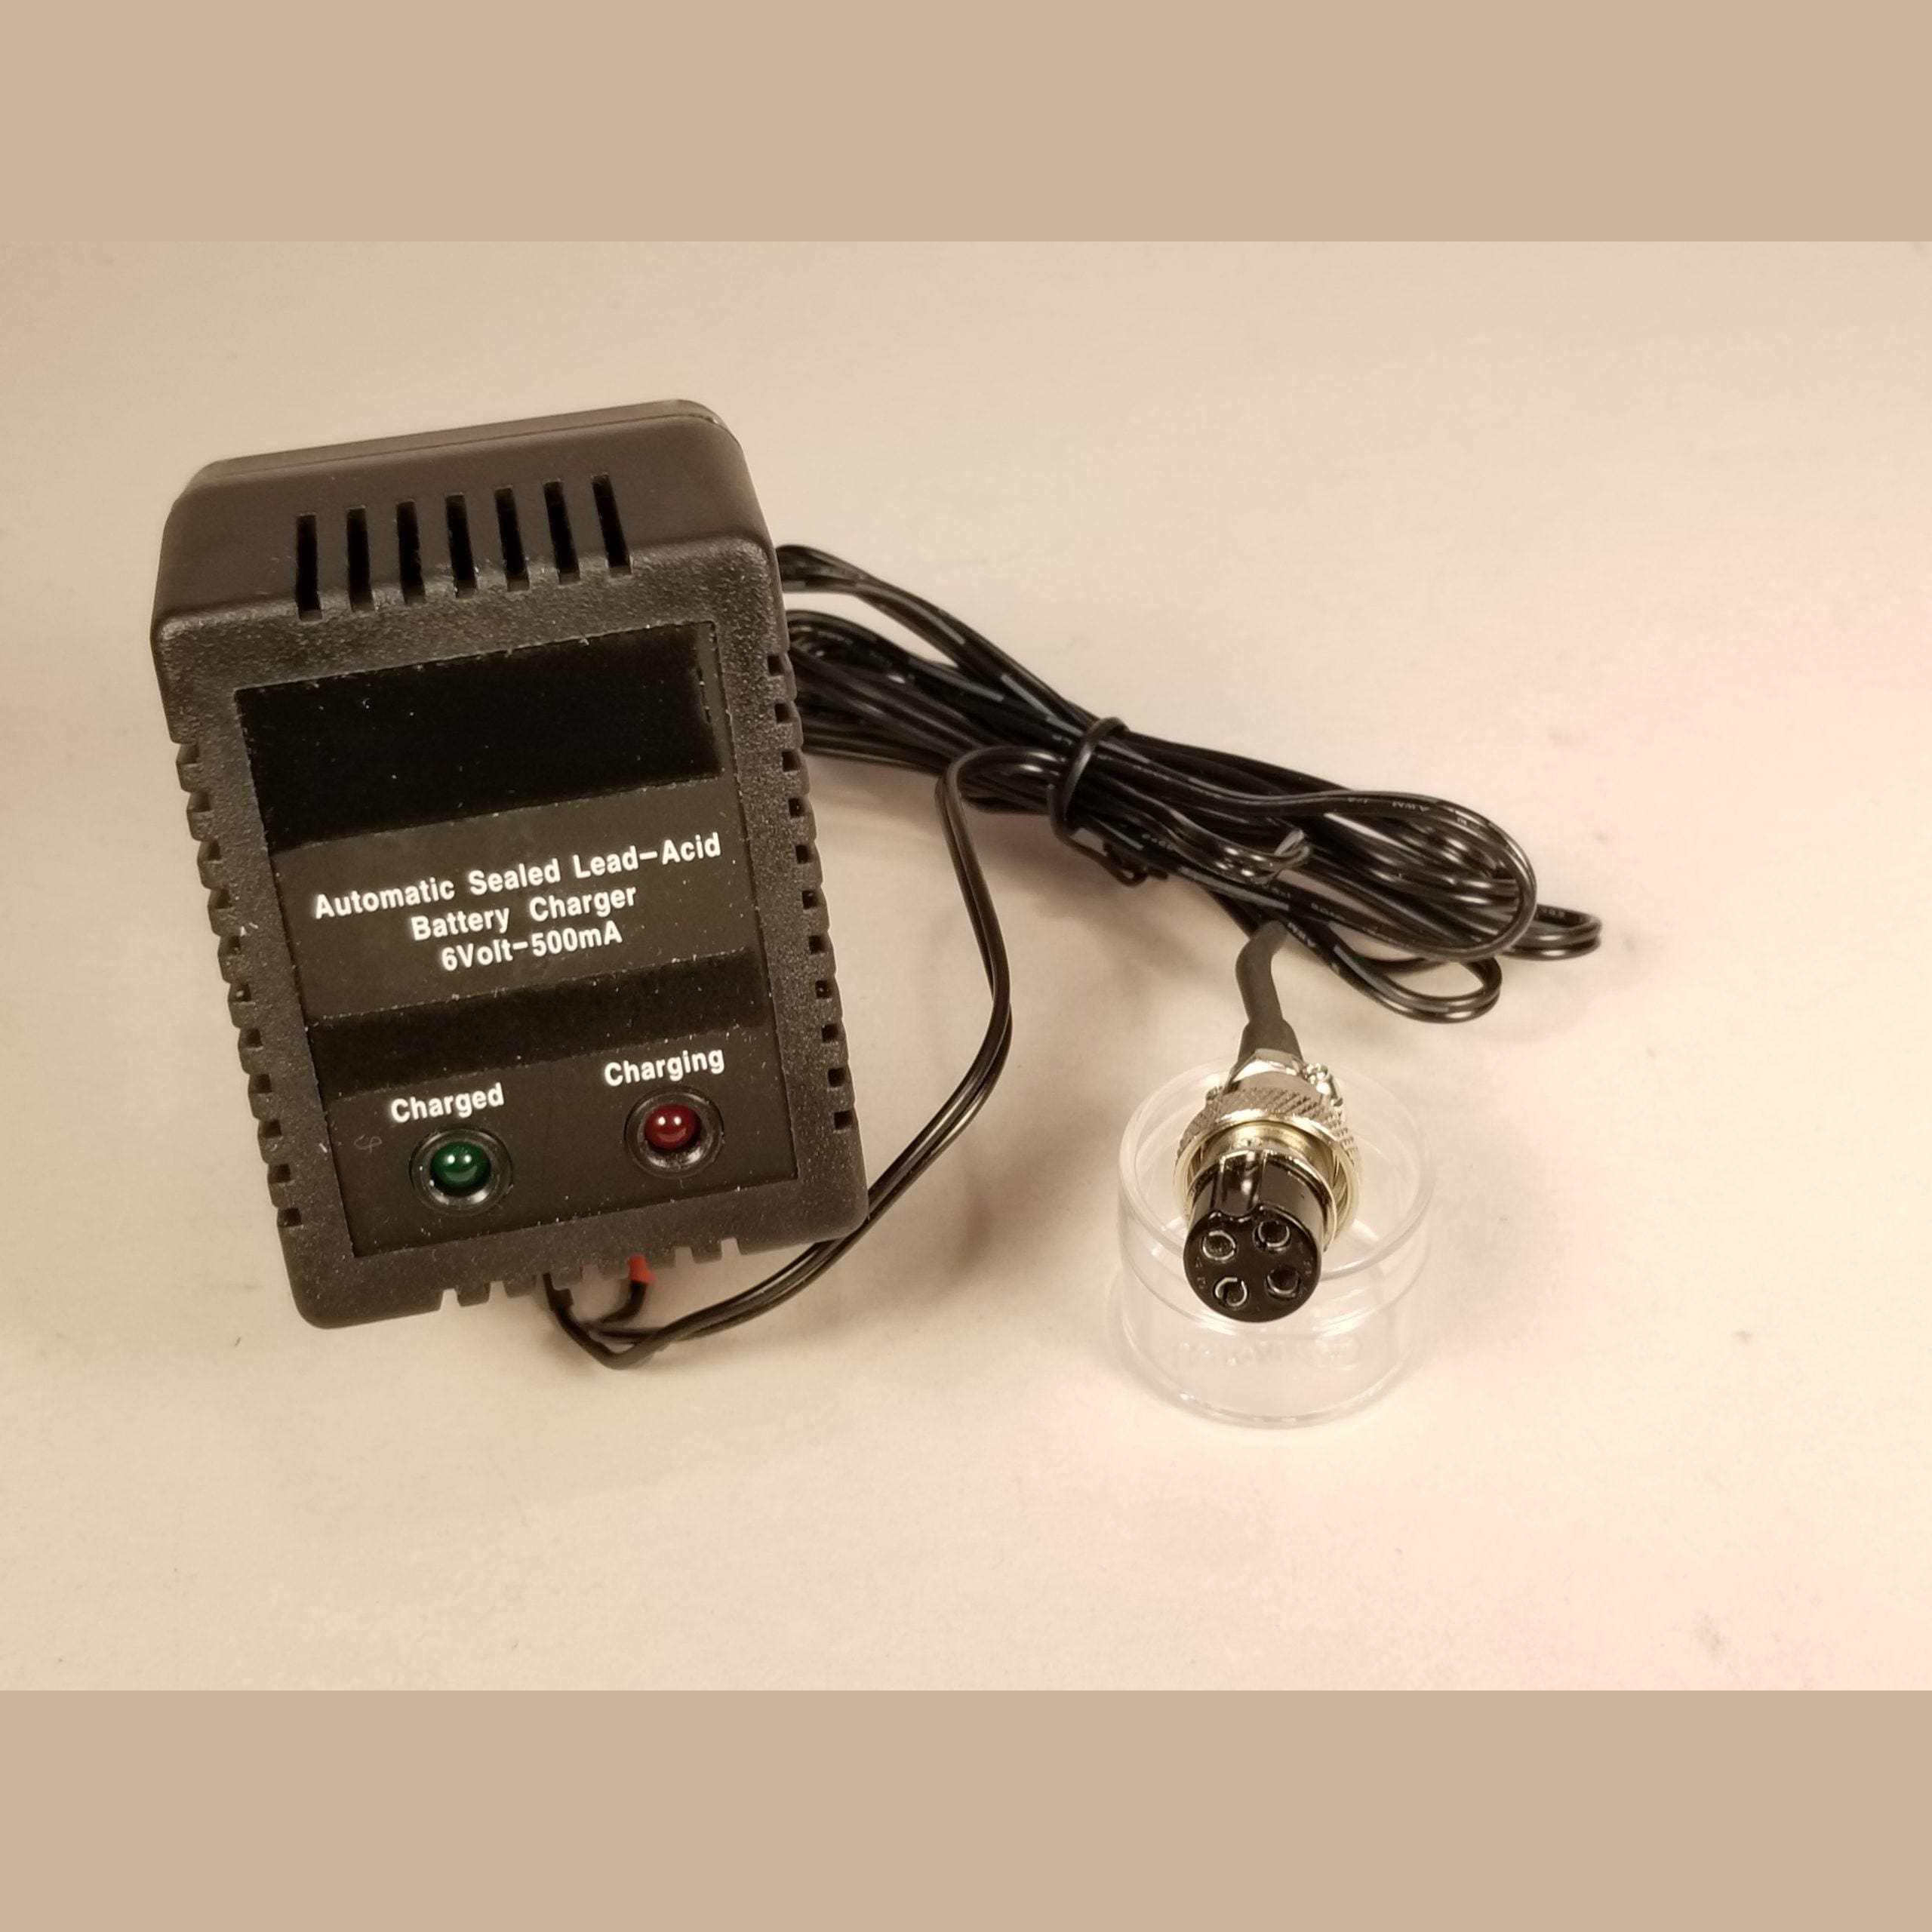 Doc’s Minelab SD/GP Series Lead Acid Battery Charger